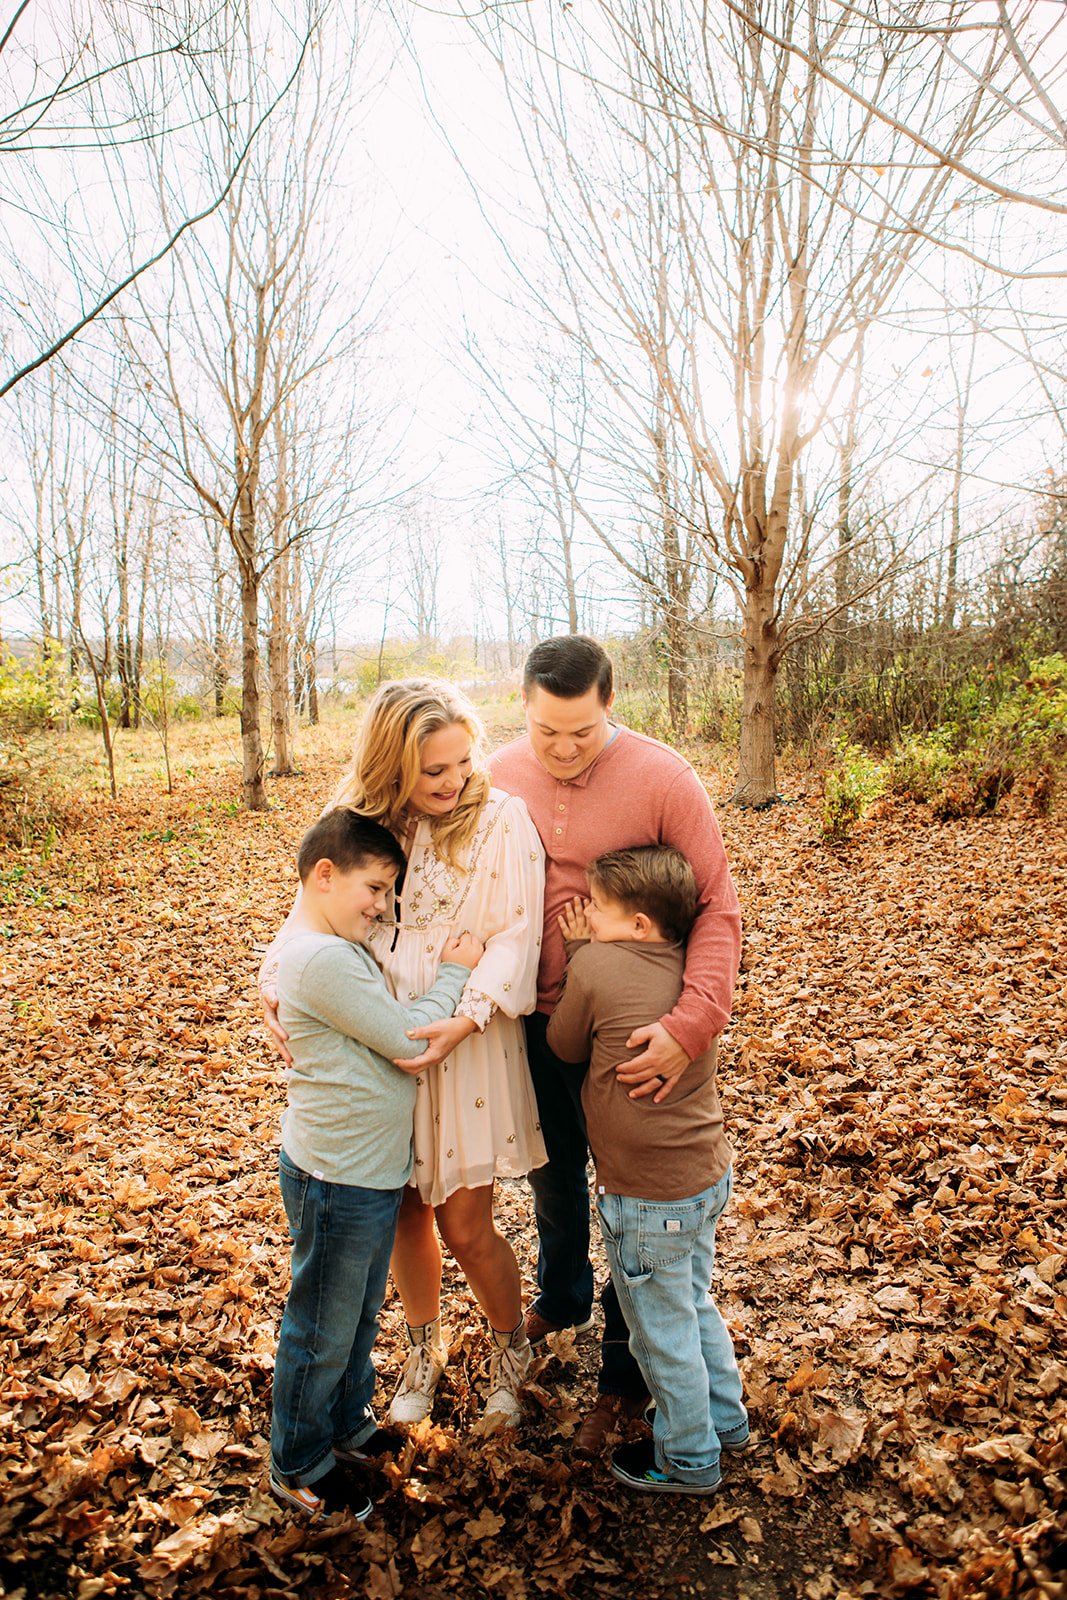  During the fall in the midwest, Teala Ward Photography captures a mother and father hugging their sons. family hug candid family photo #TealaWardPhotography #TealaWardFamilies #holidayfamilypics #photography #Illinoisfamilyphotography #familysession